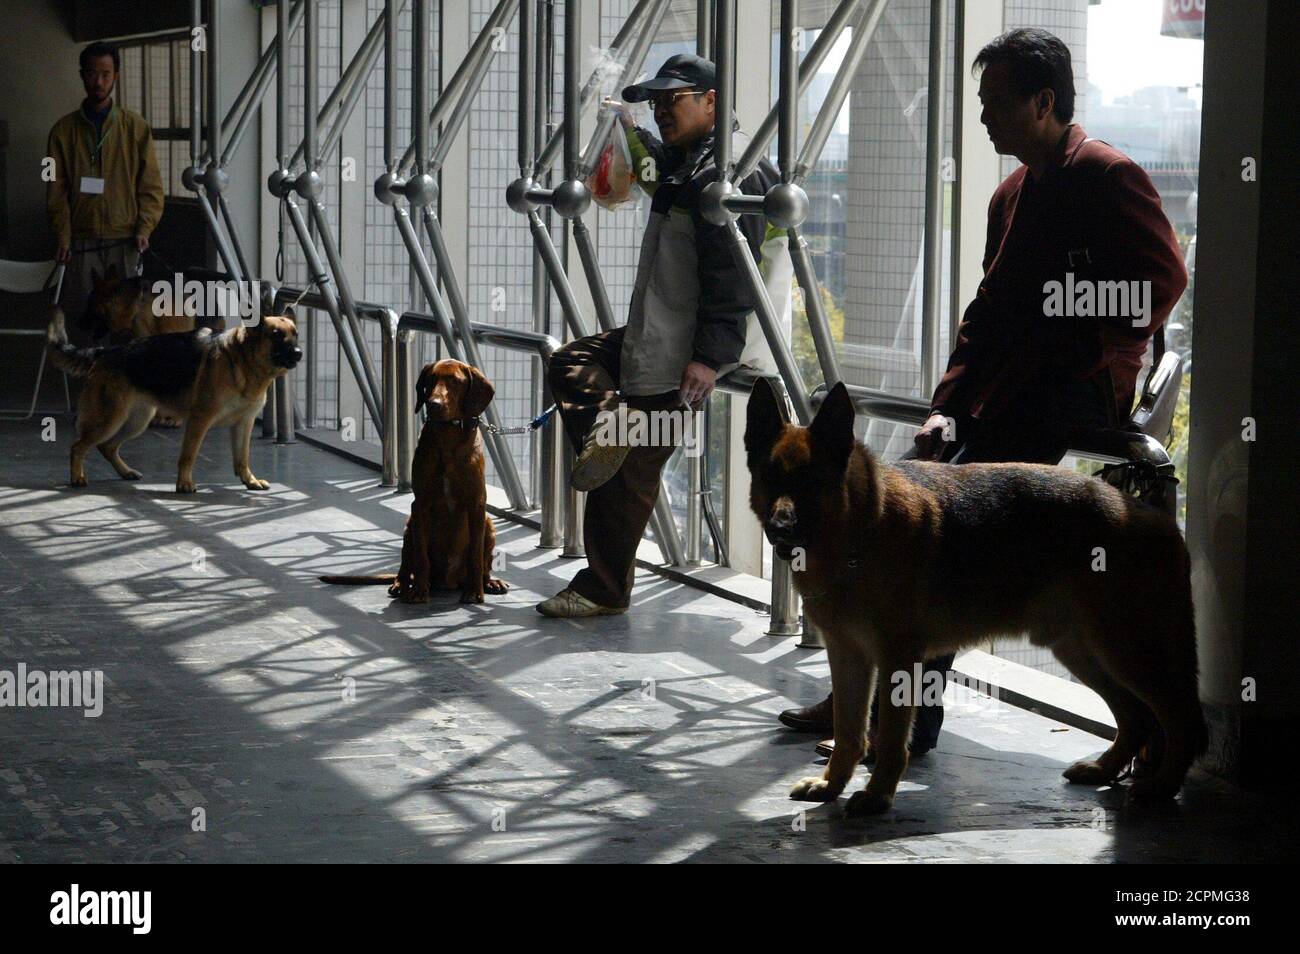 Chinese dog owners wait on the sideline of a Pet Festival in Shanghai March 26, 2004. Dog ownership, banned under the rule of the late Mao Zedong as a bourgeois pastime, was legalised only a few years ago as higher living standards allowed many people to afford pets, including imported breeds. REUTERS/Claro Cortes IV  CC Stock Photo